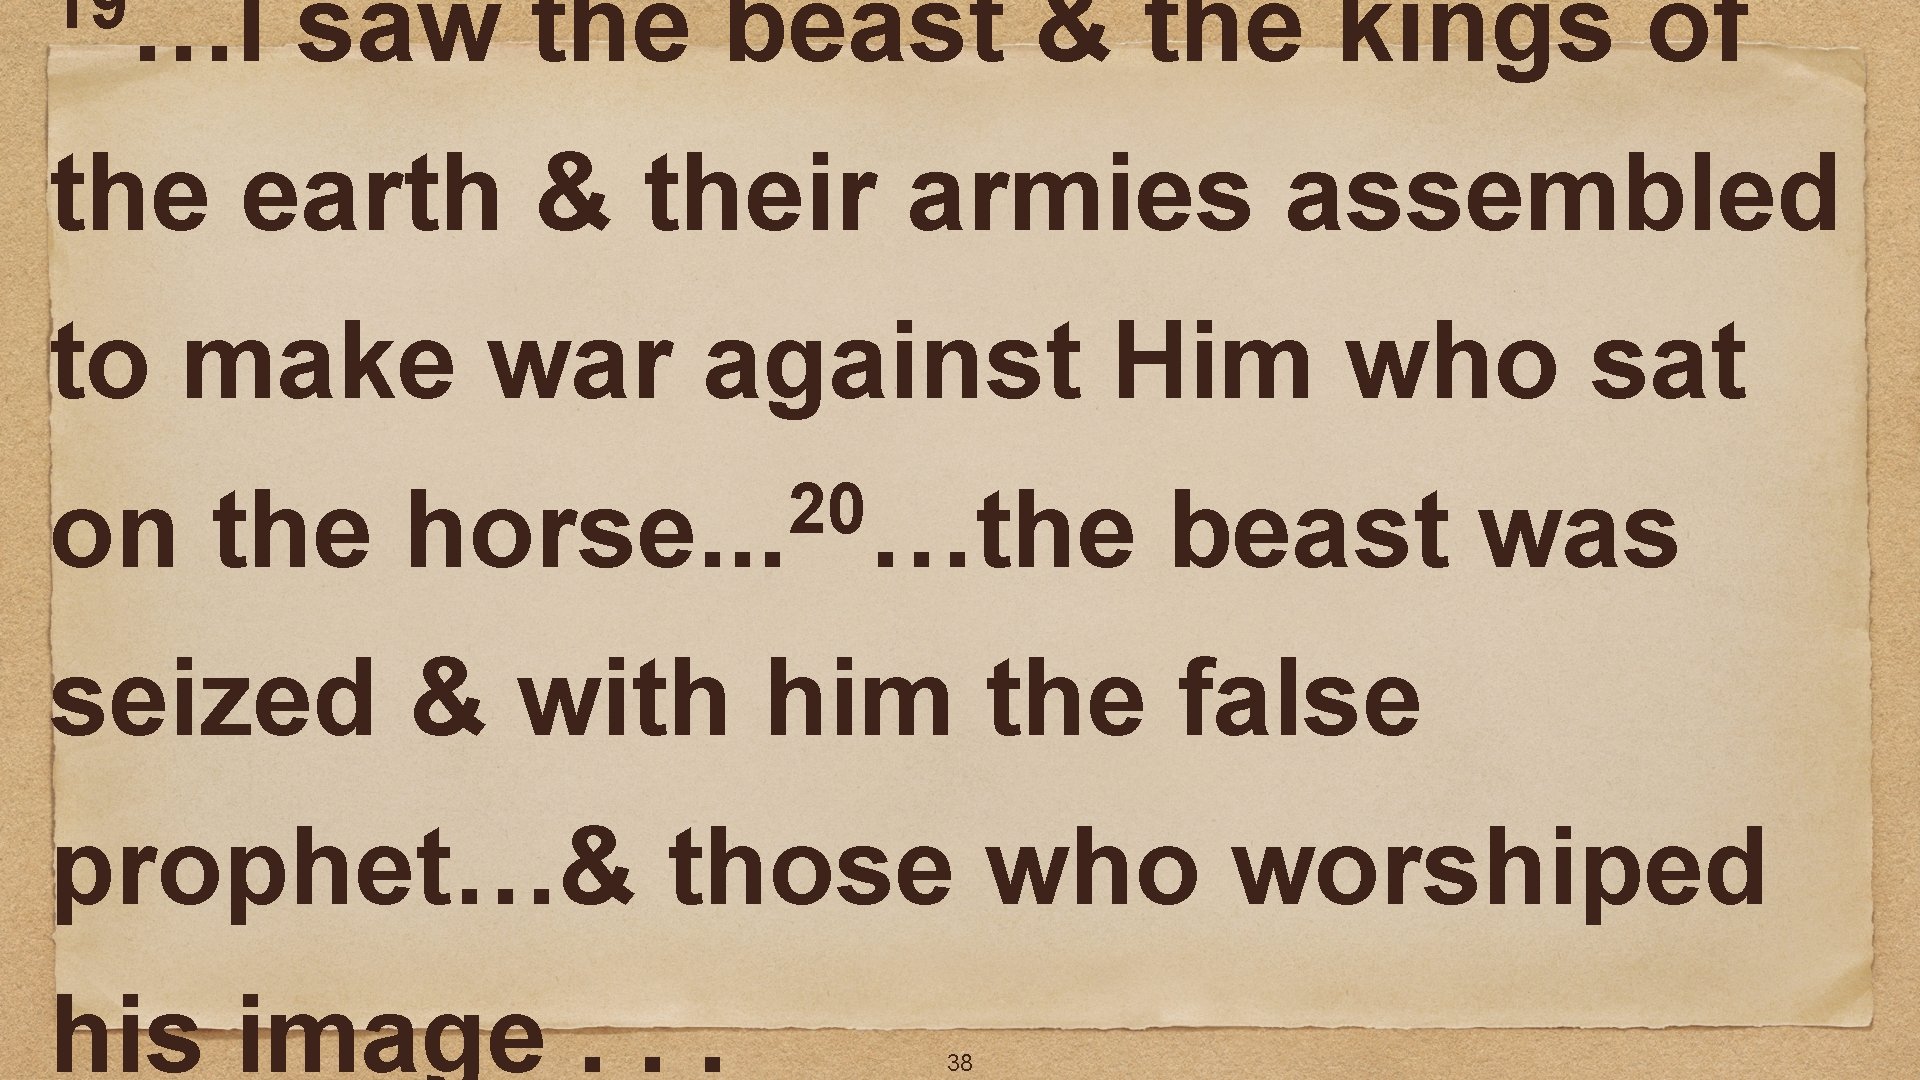 19…I saw the beast & the kings of the earth & their armies assembled